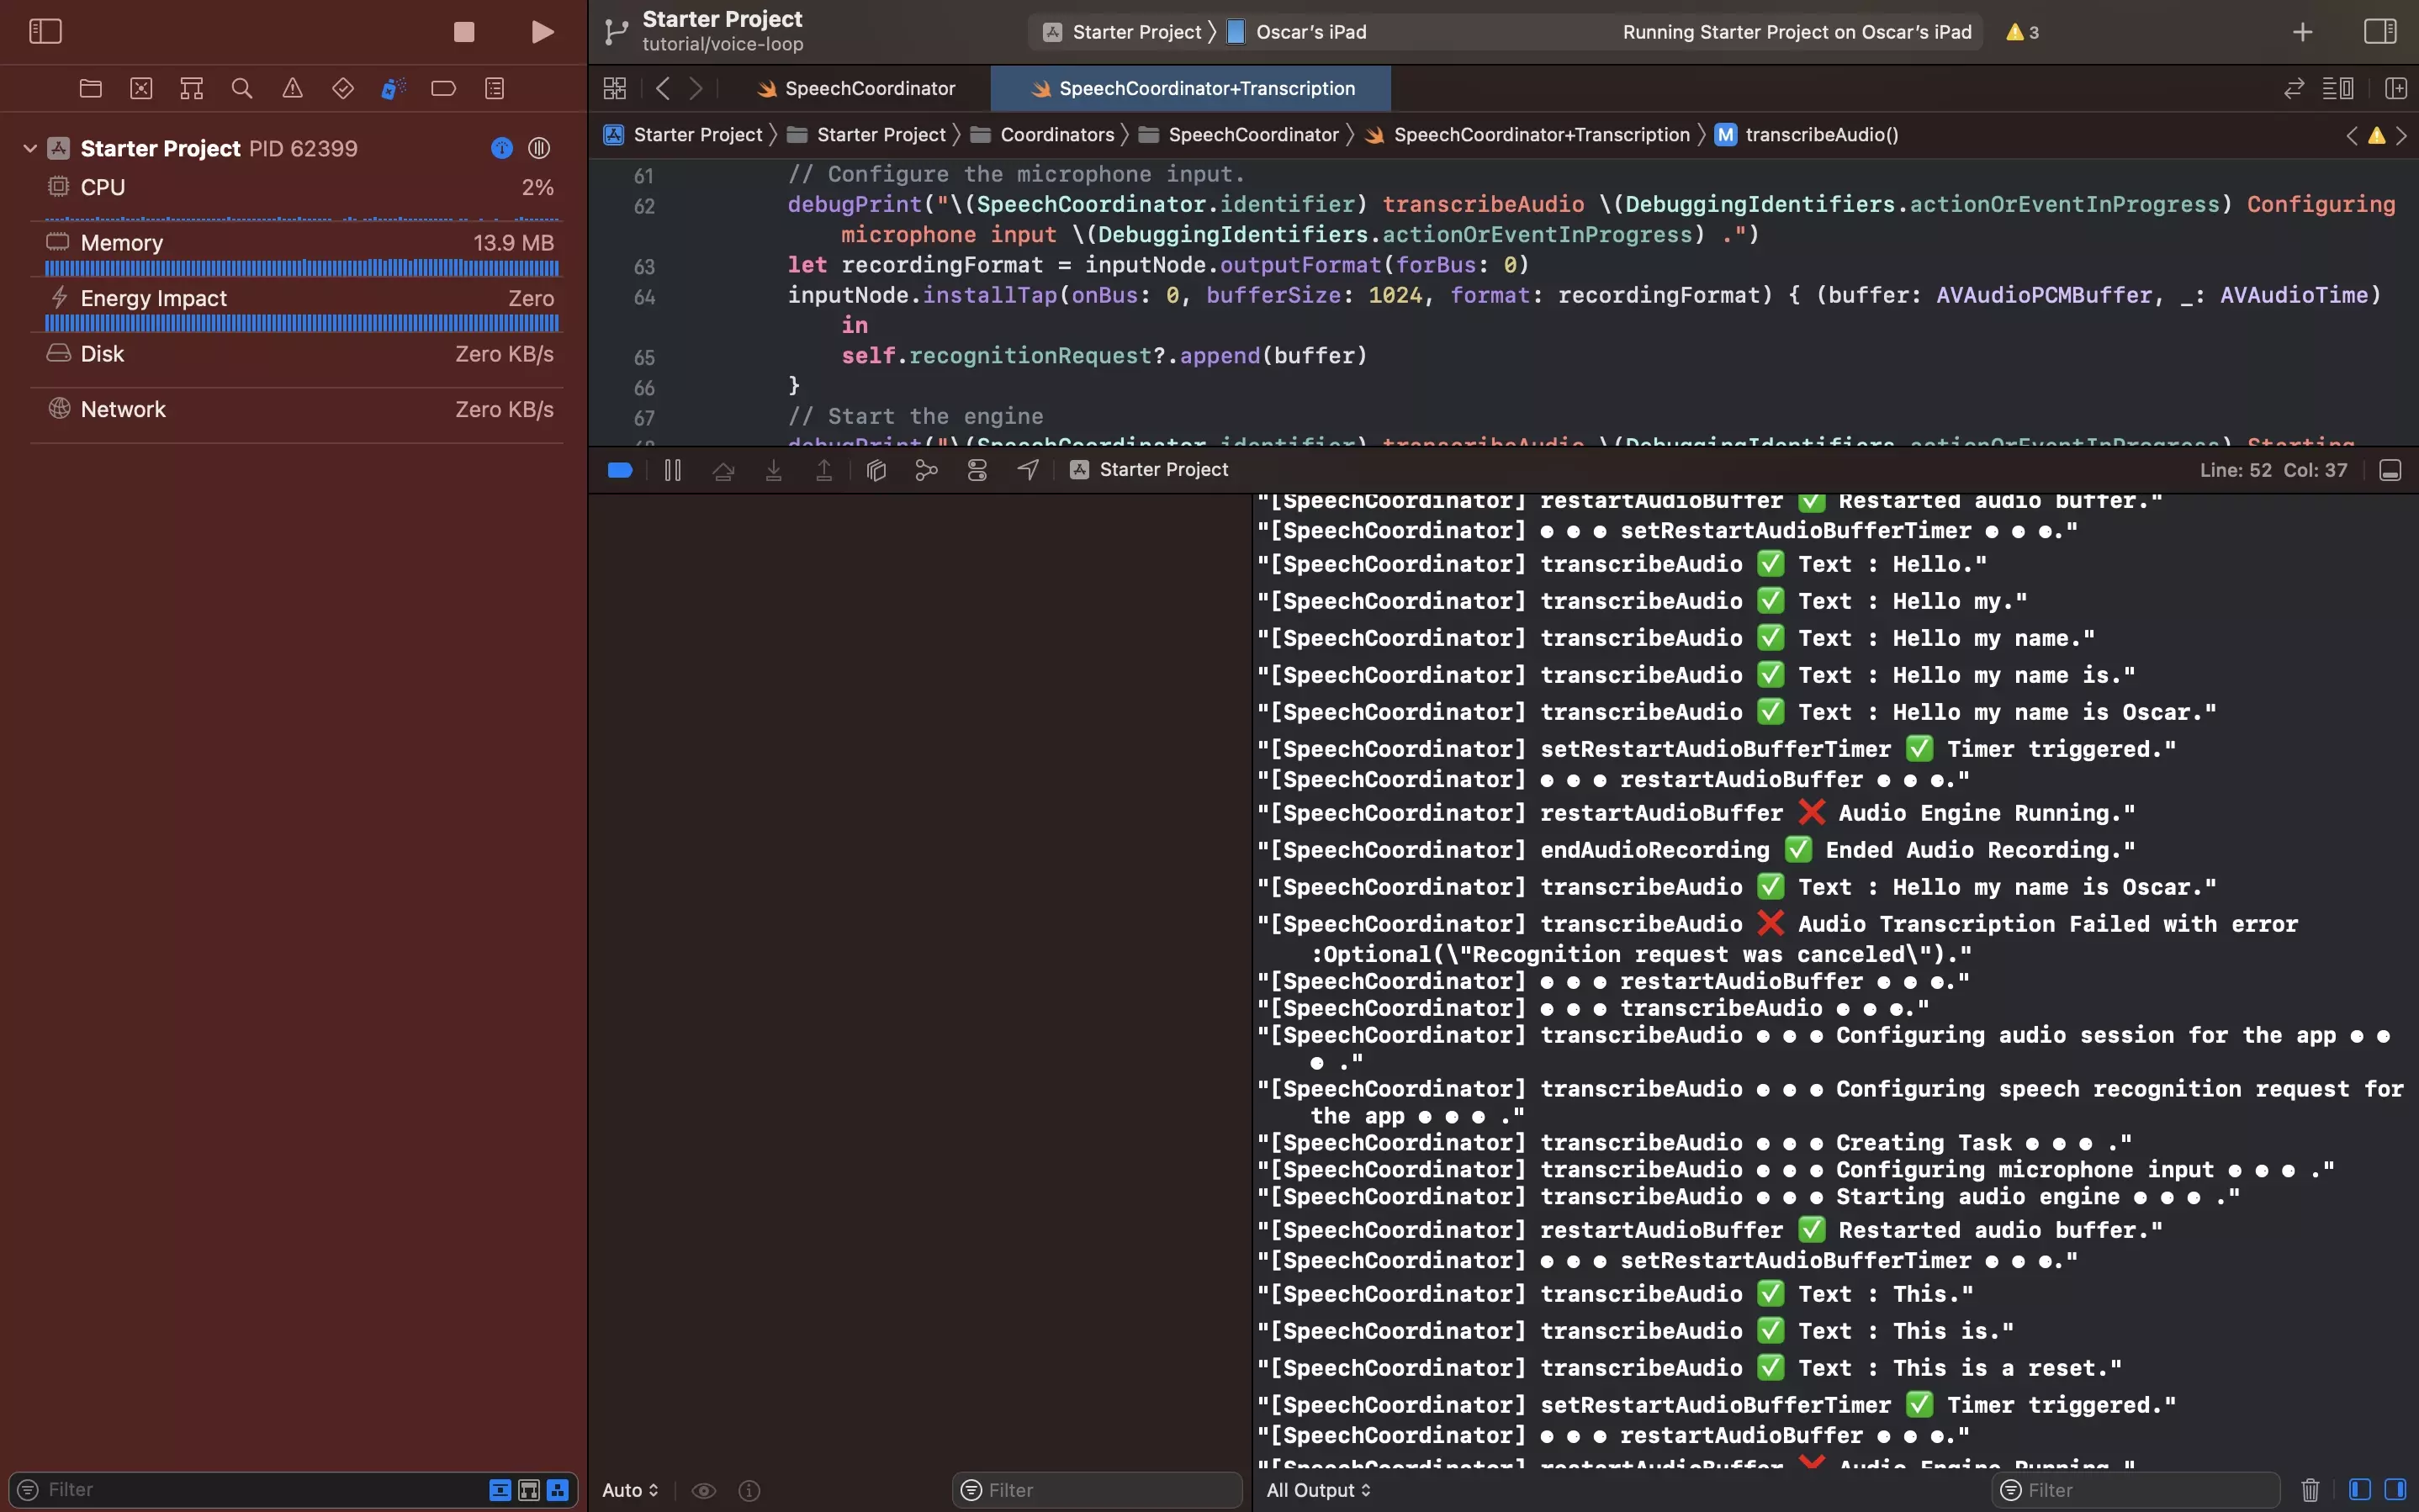 A screenshot of Xcode showing the looping functionality working.